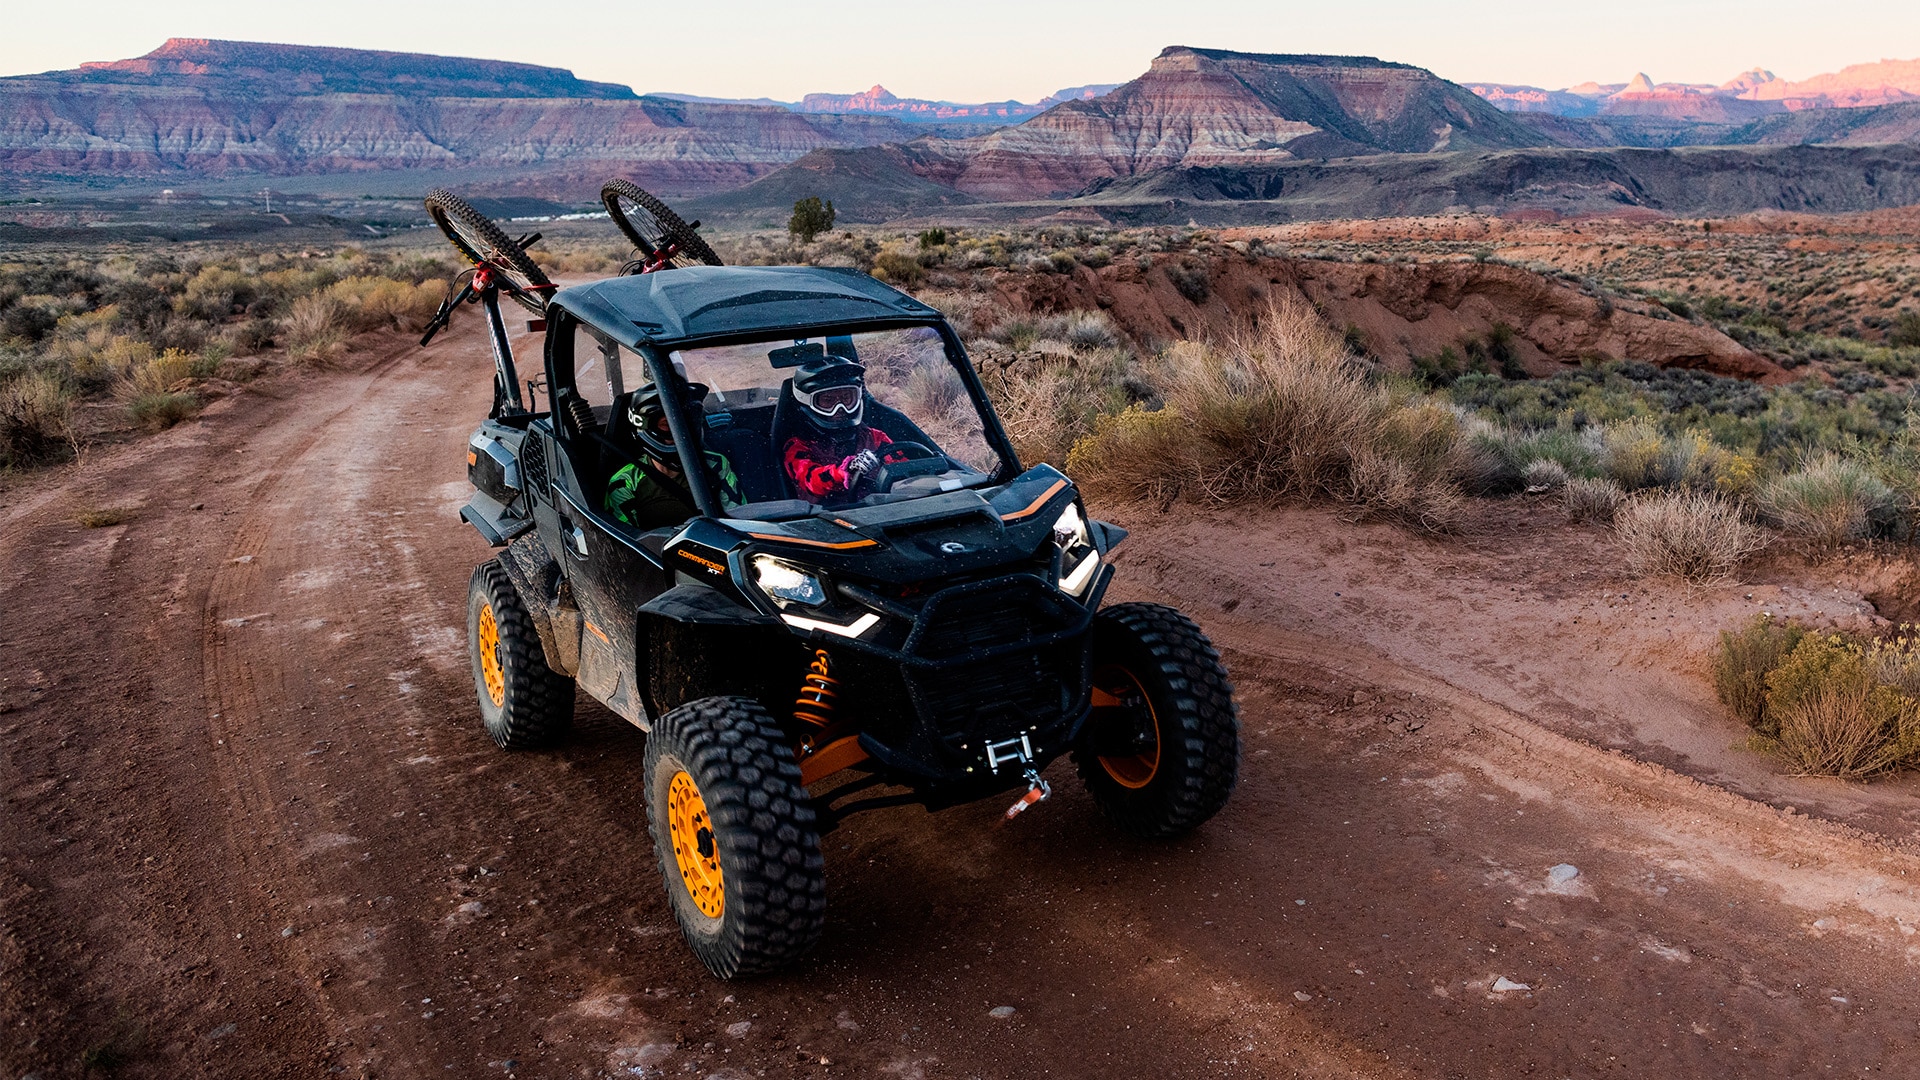 Samantha Soriano wearing a Can-Am helmet and driving the Can-Am Commander with orange trims on a trail